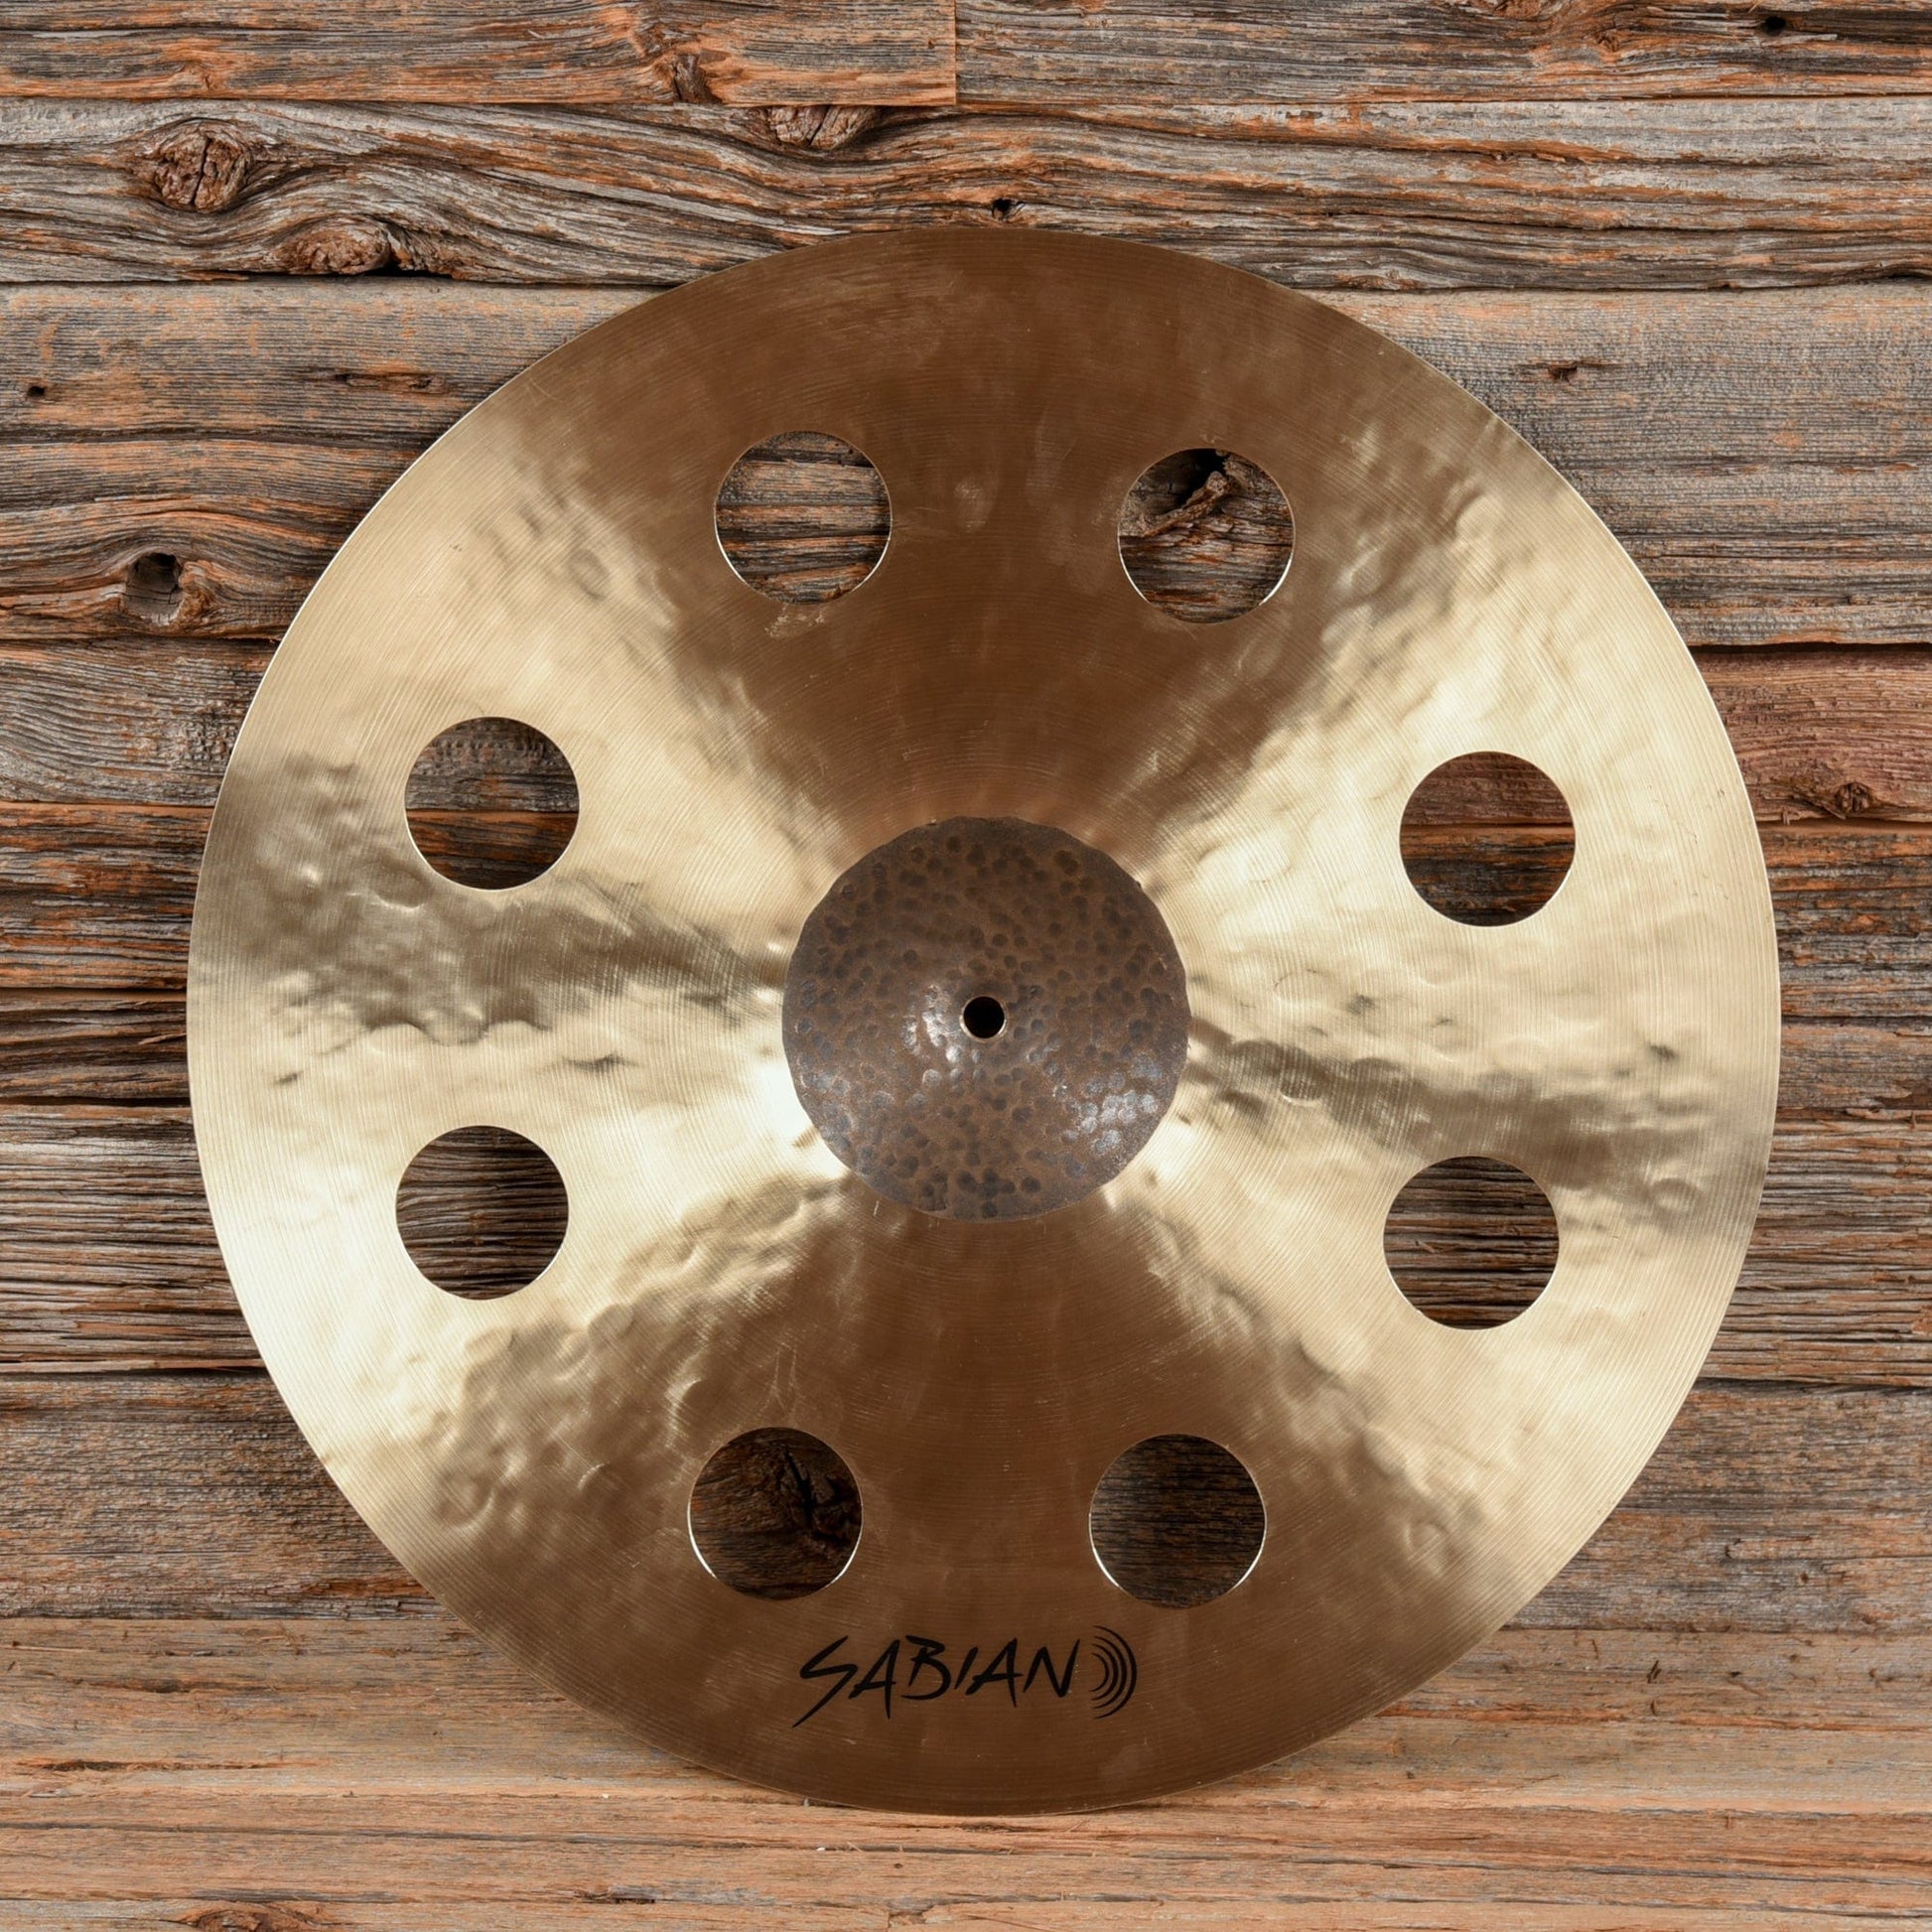 Sabian 19" HHX Complex O-Zone Crash Cymbal USED Drums and Percussion